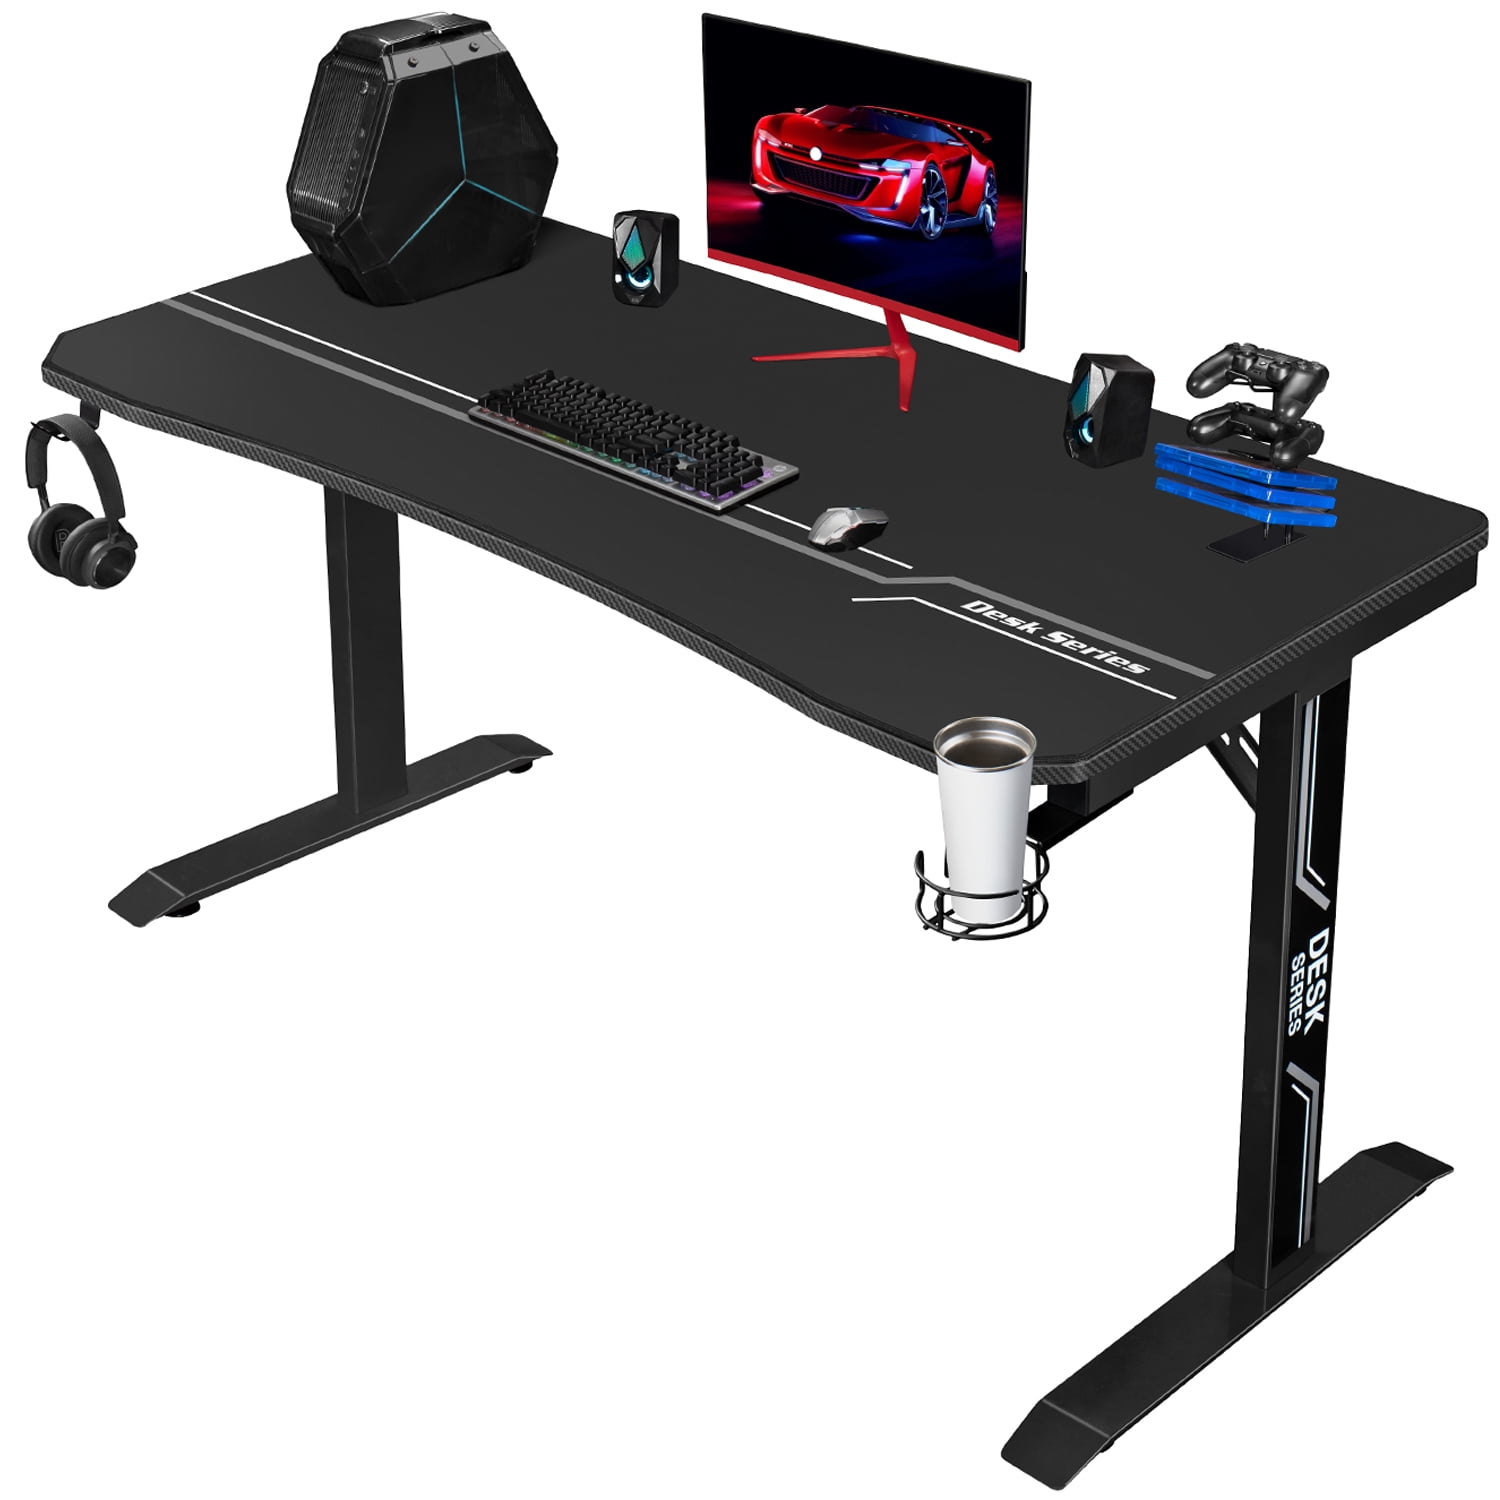 Lacoo 55 inches T-Shape Metal Frame Gaming Computer Desk